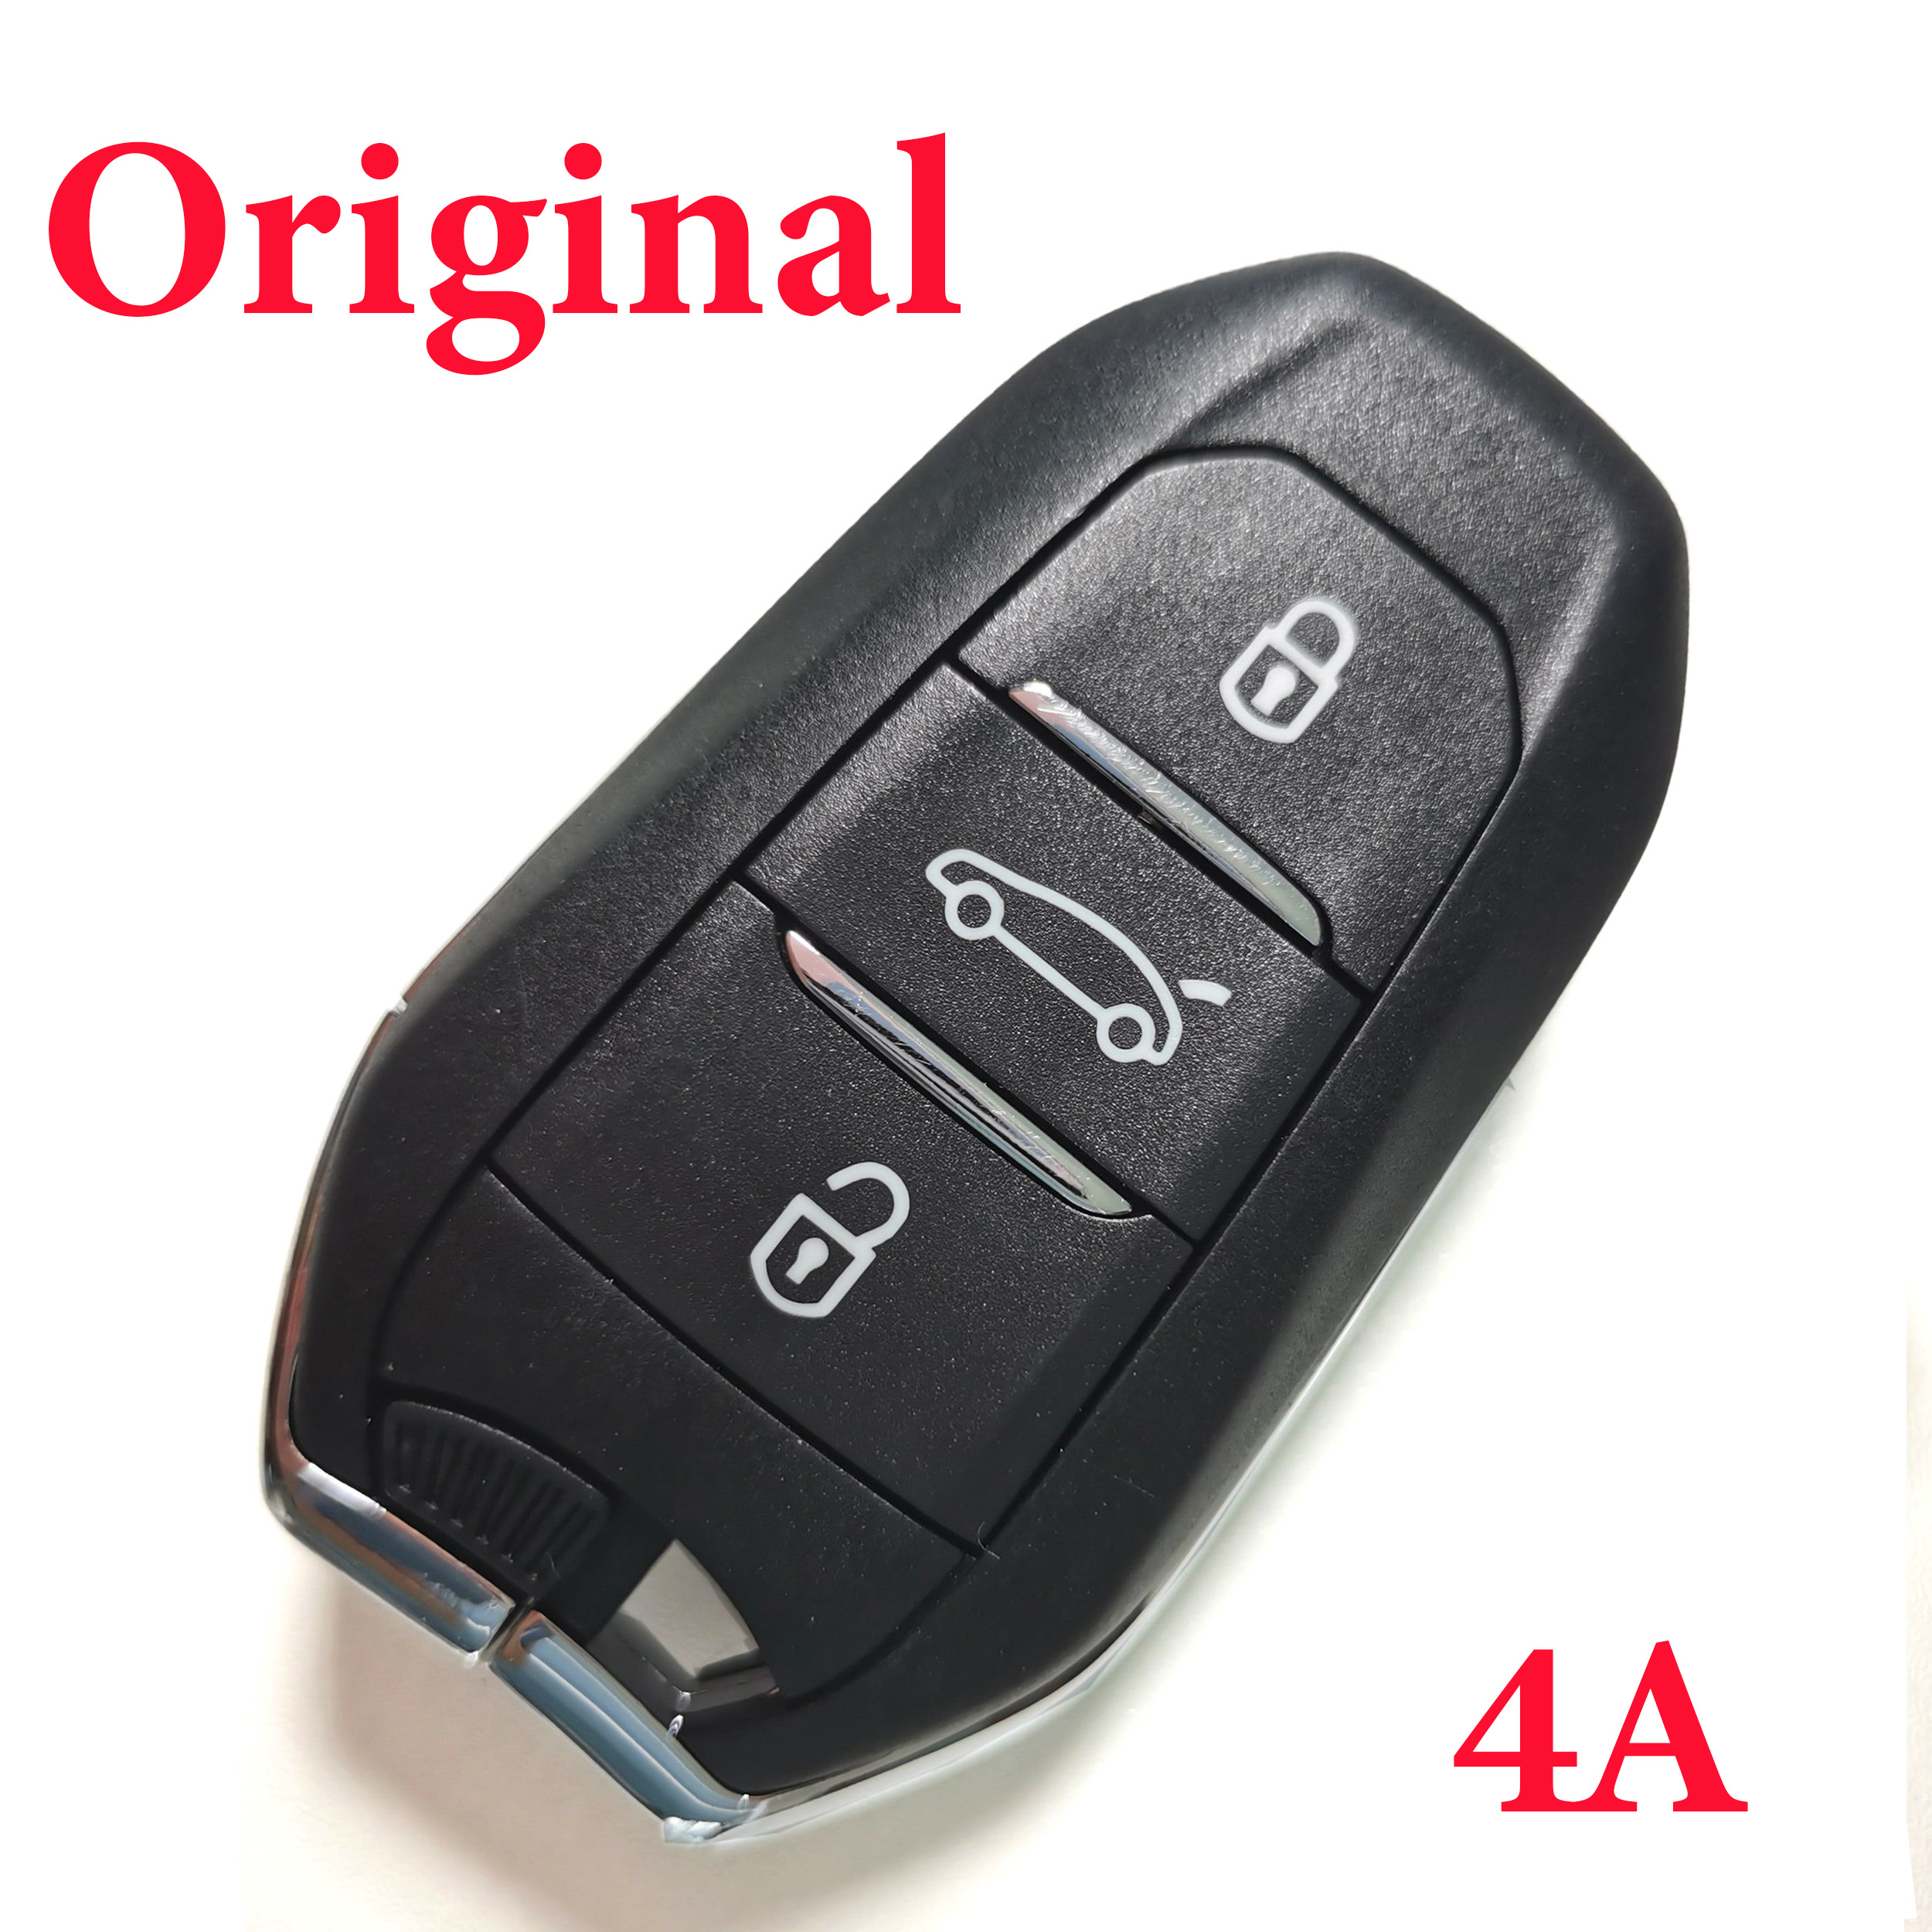 Original 3 Buttons 434 MHz  Proximity Key for Citroen With 4A Chip